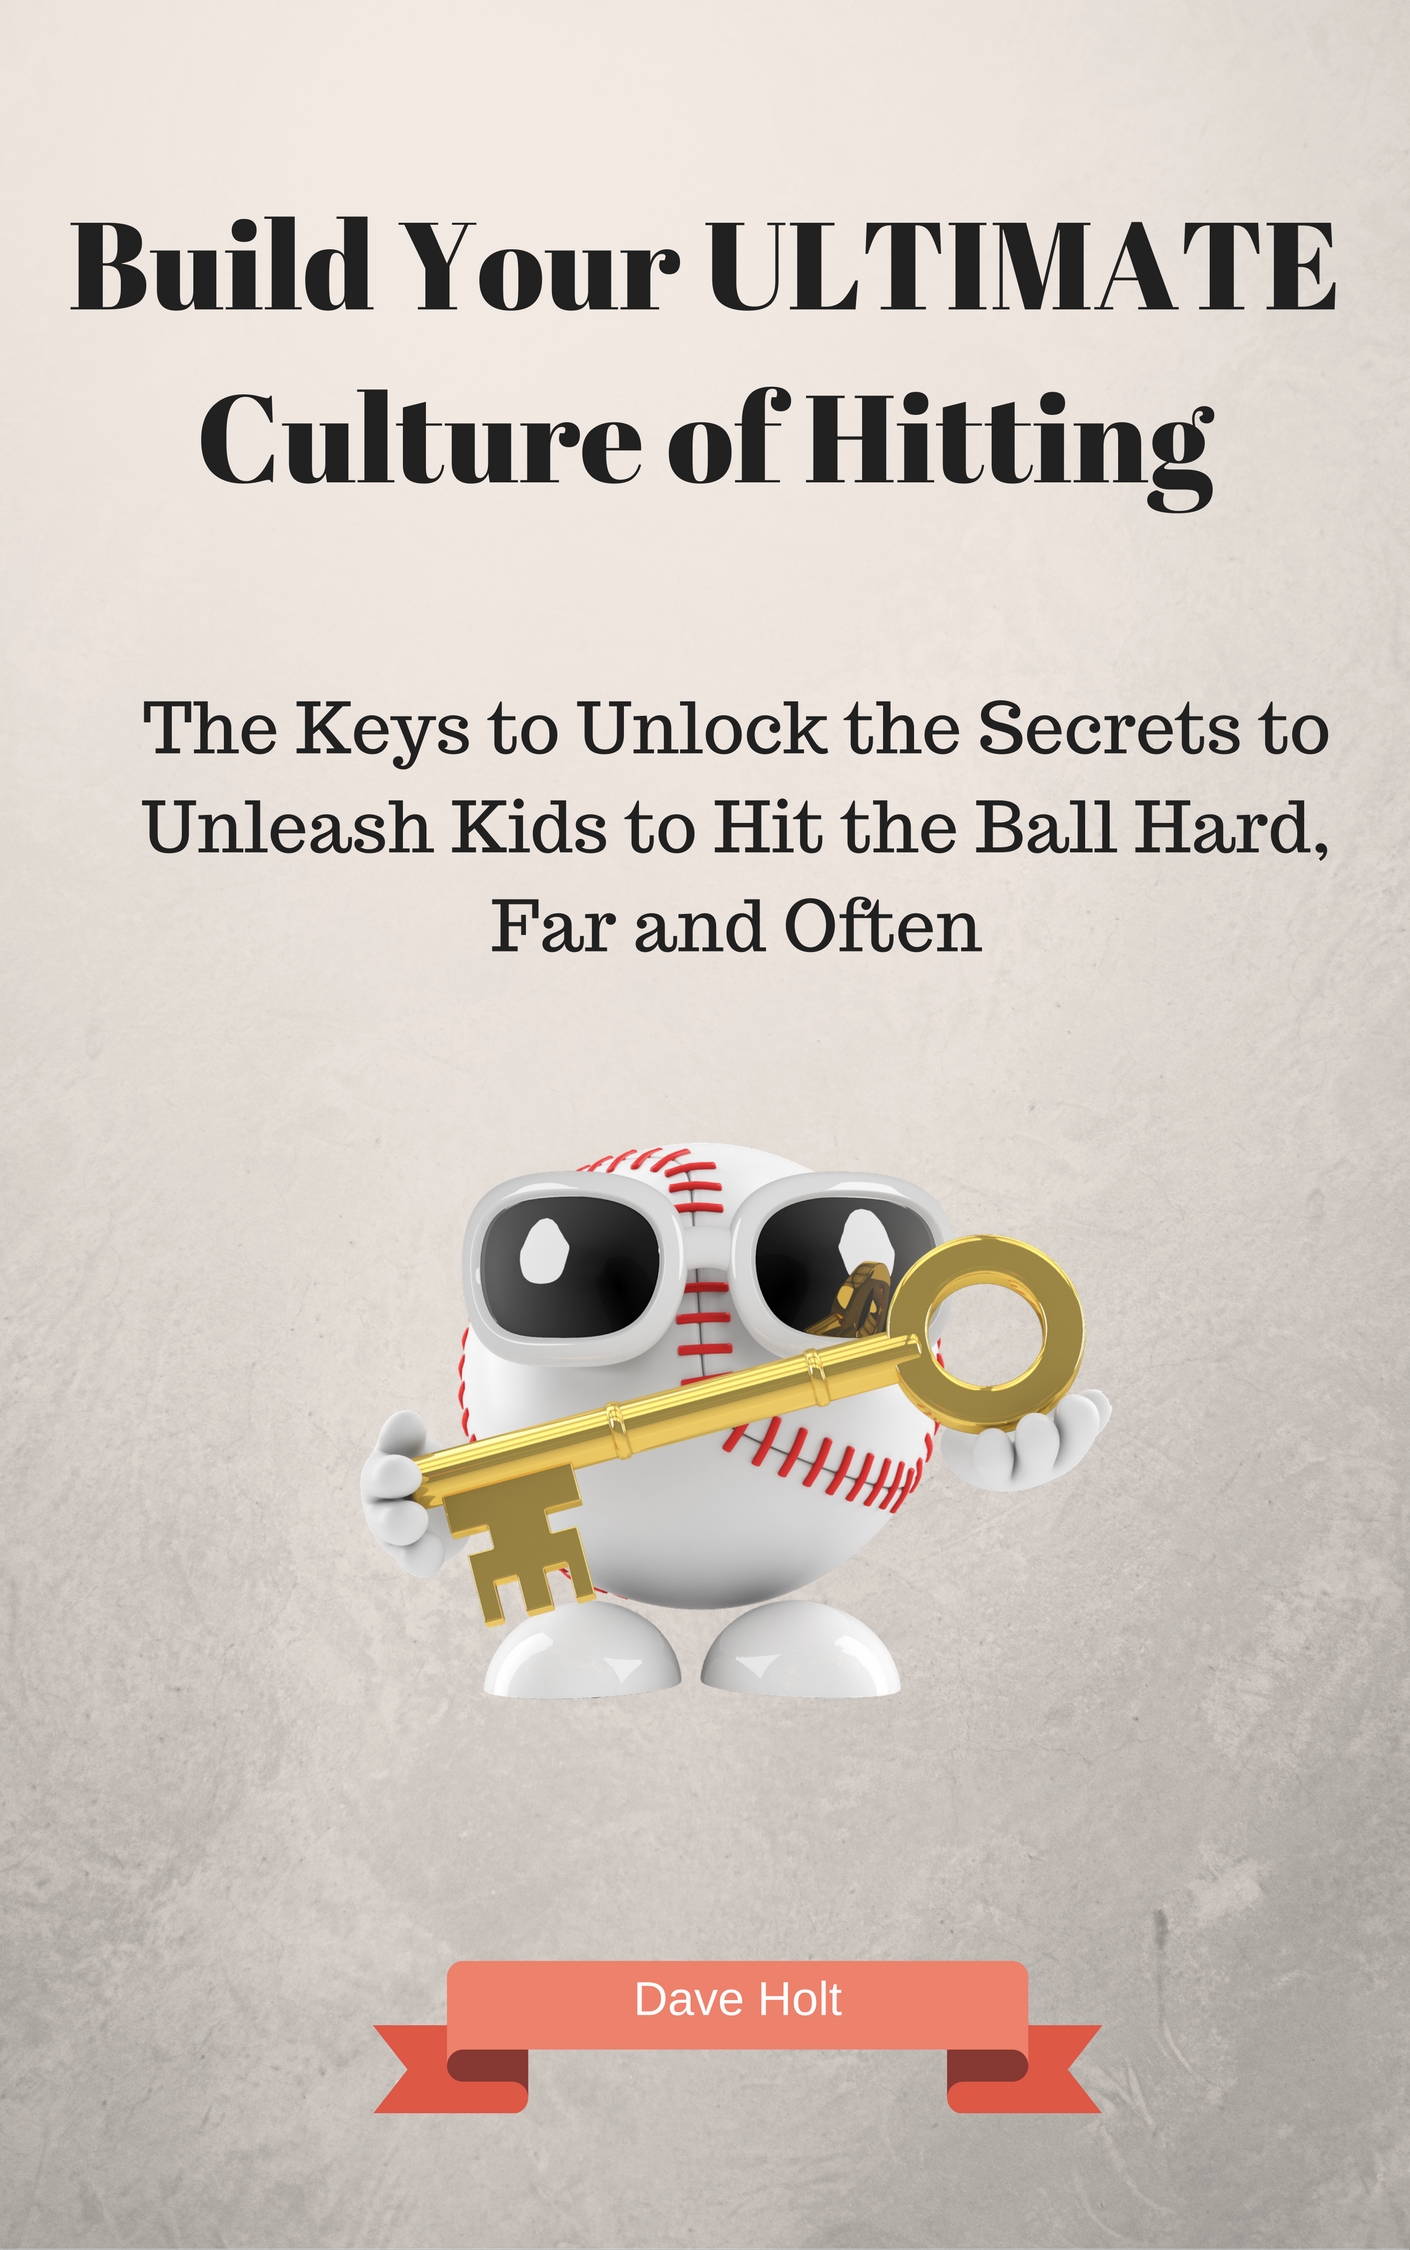 How to Build Your Ultimate Culture of Hitting